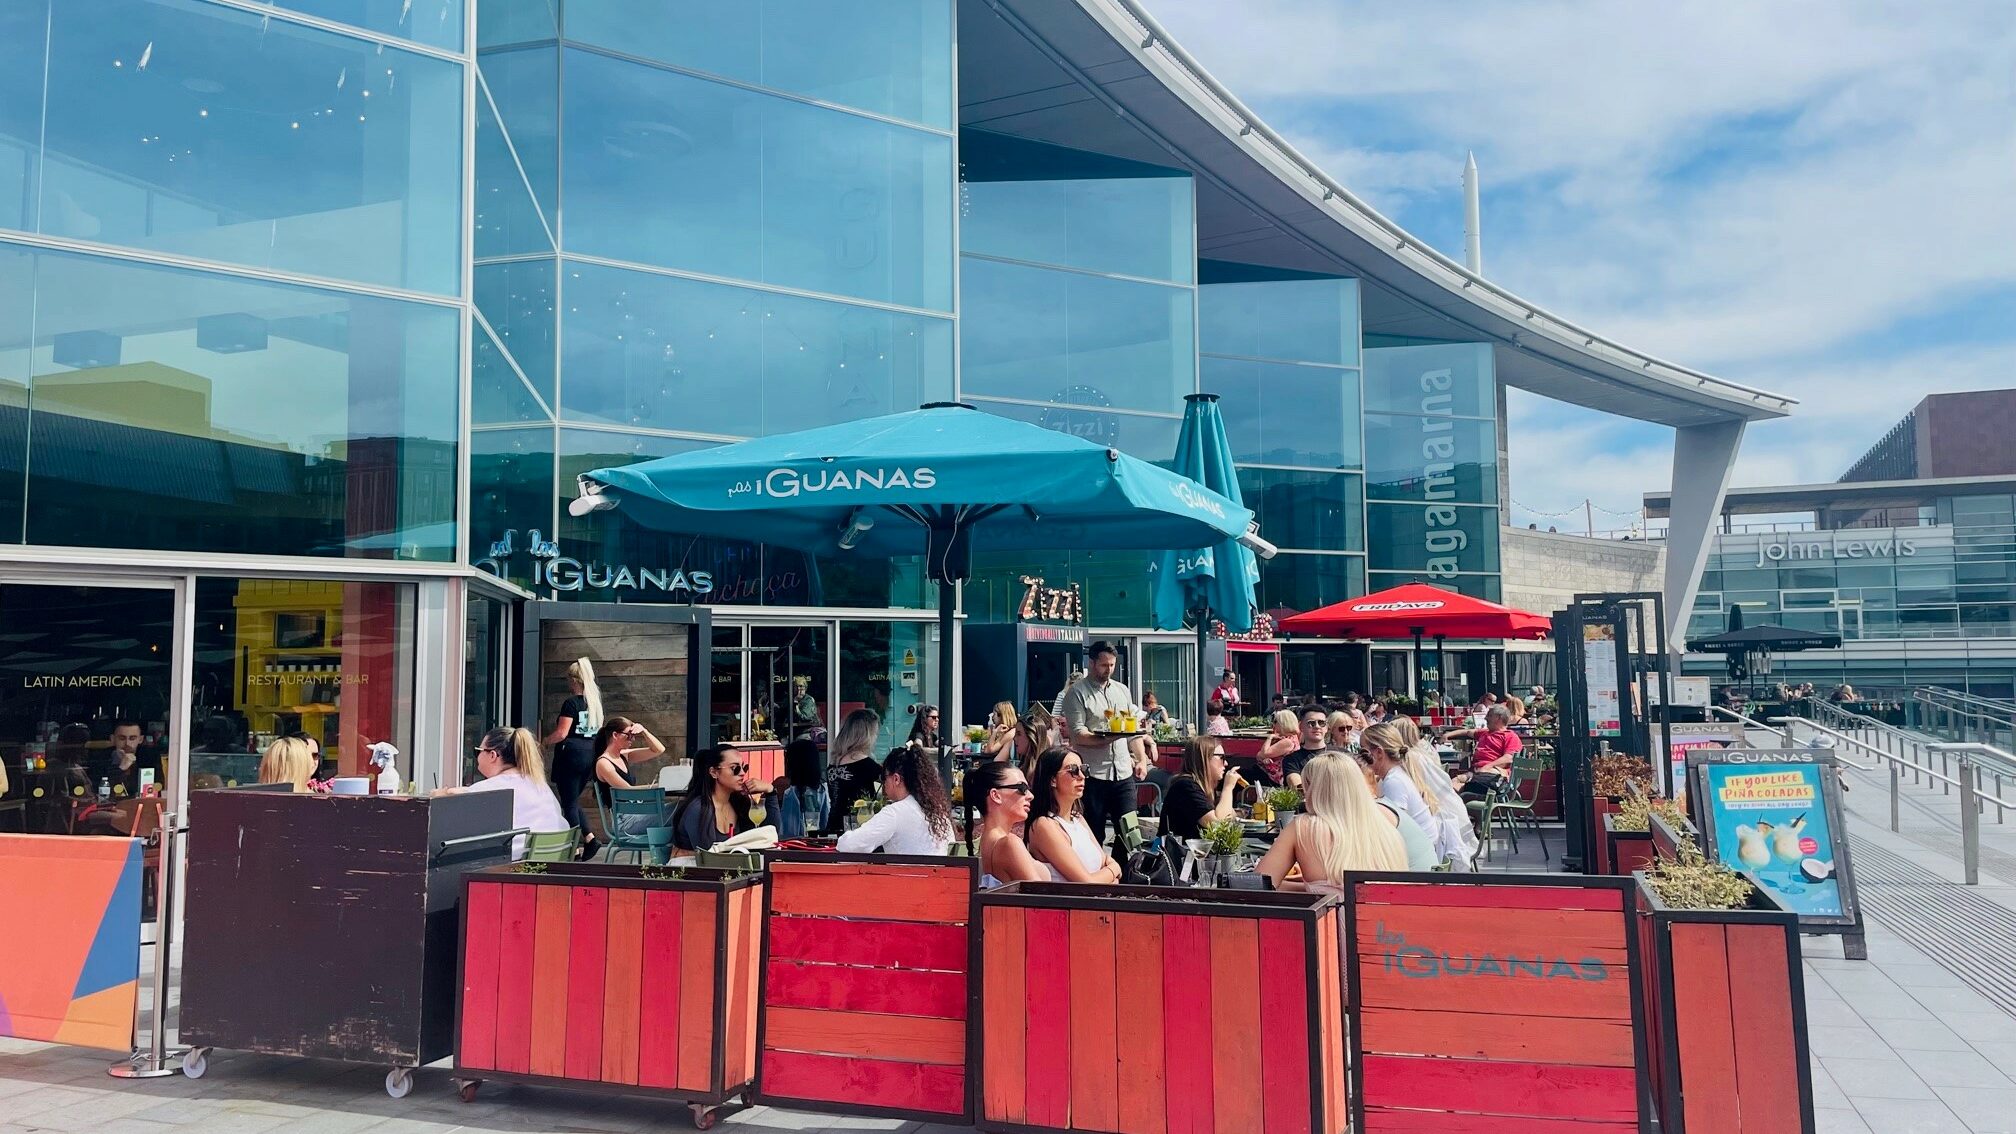 Alfresco Dining at Liverpool ONE